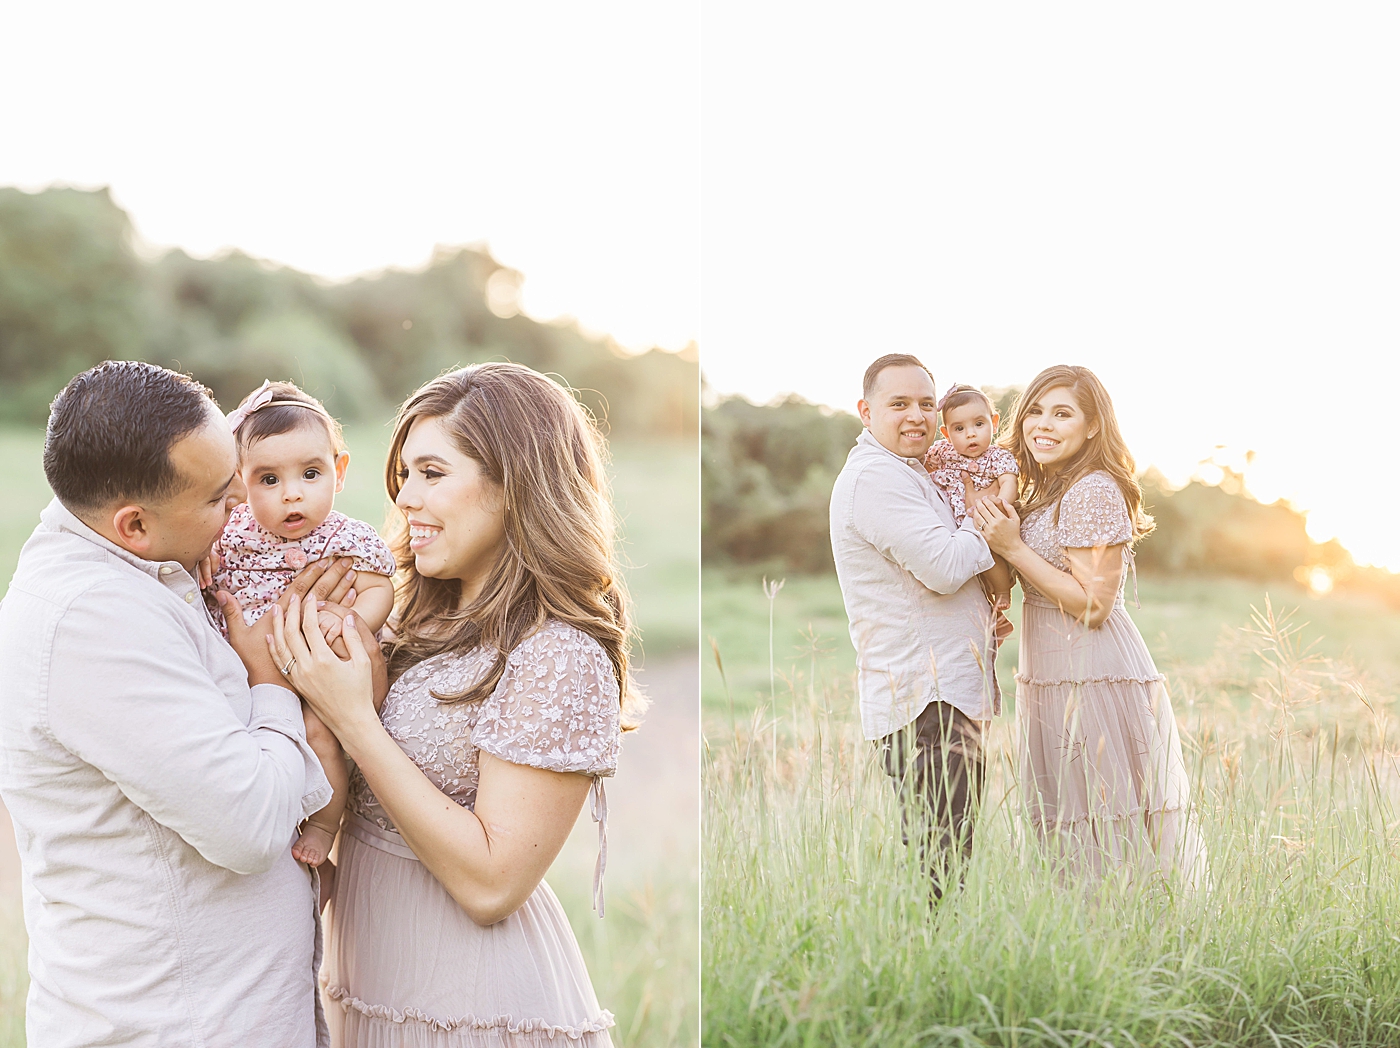 Outdoor family photos for parents and 3 month old daughter. Photo by Fresh Light Photography.